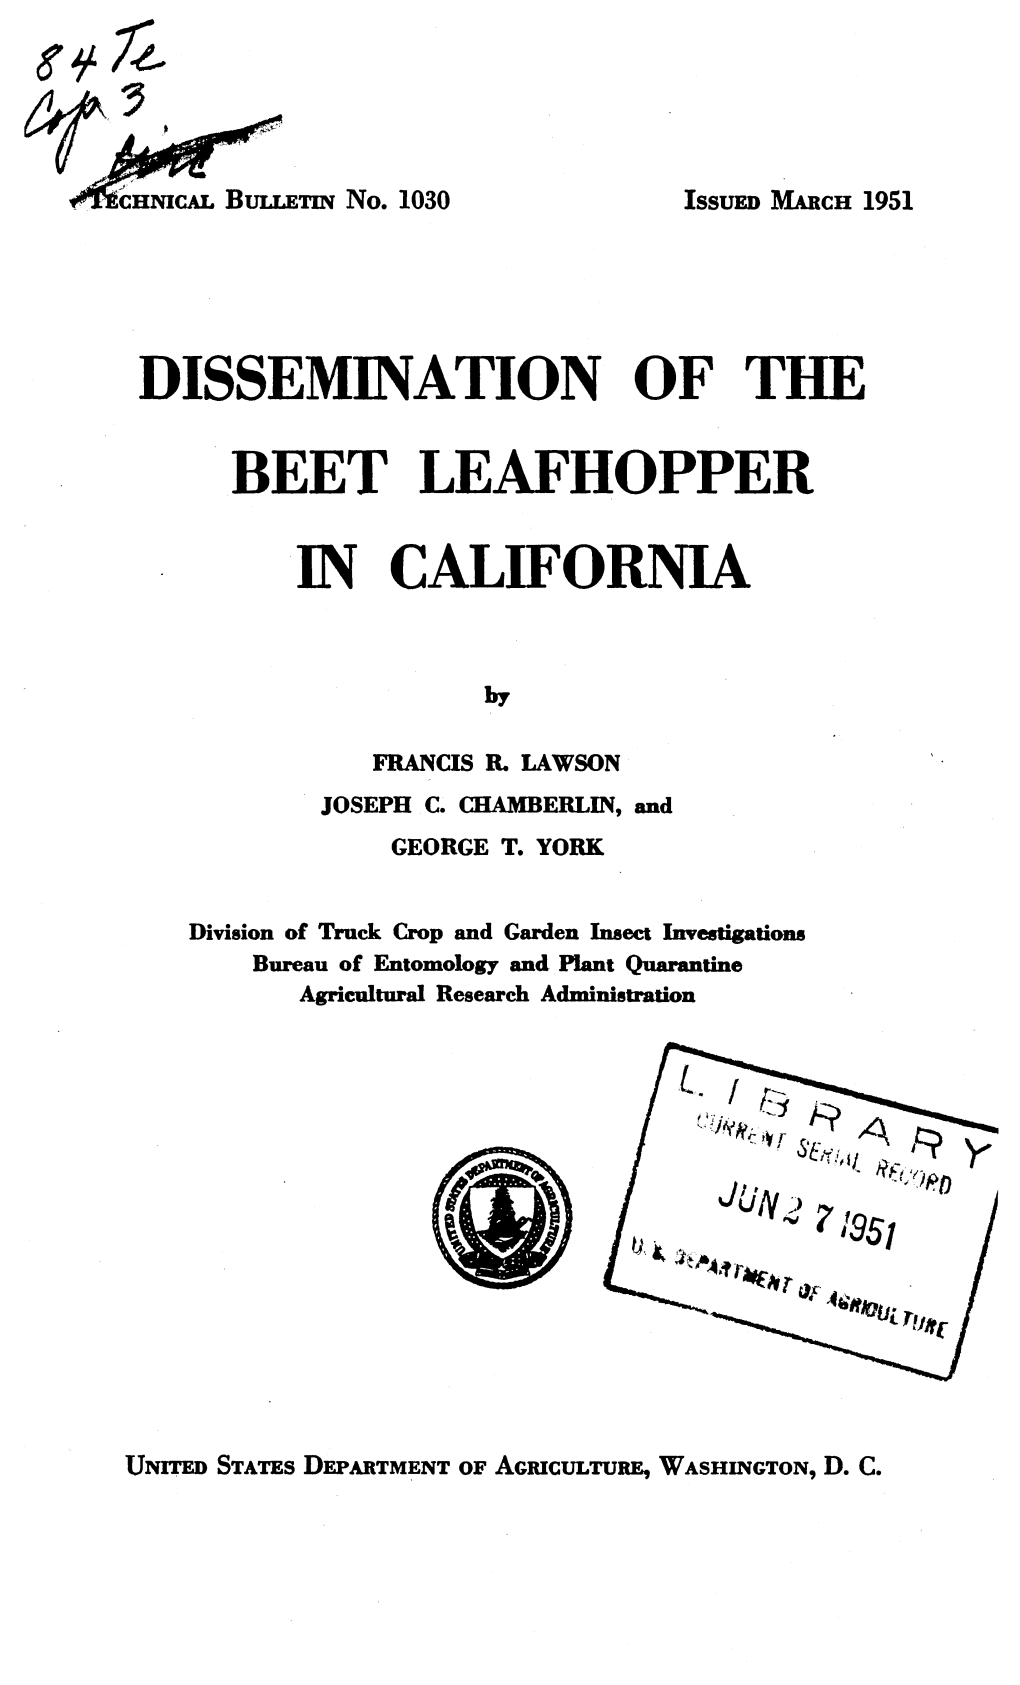 Dissemination of the Beet Leafhopper in California